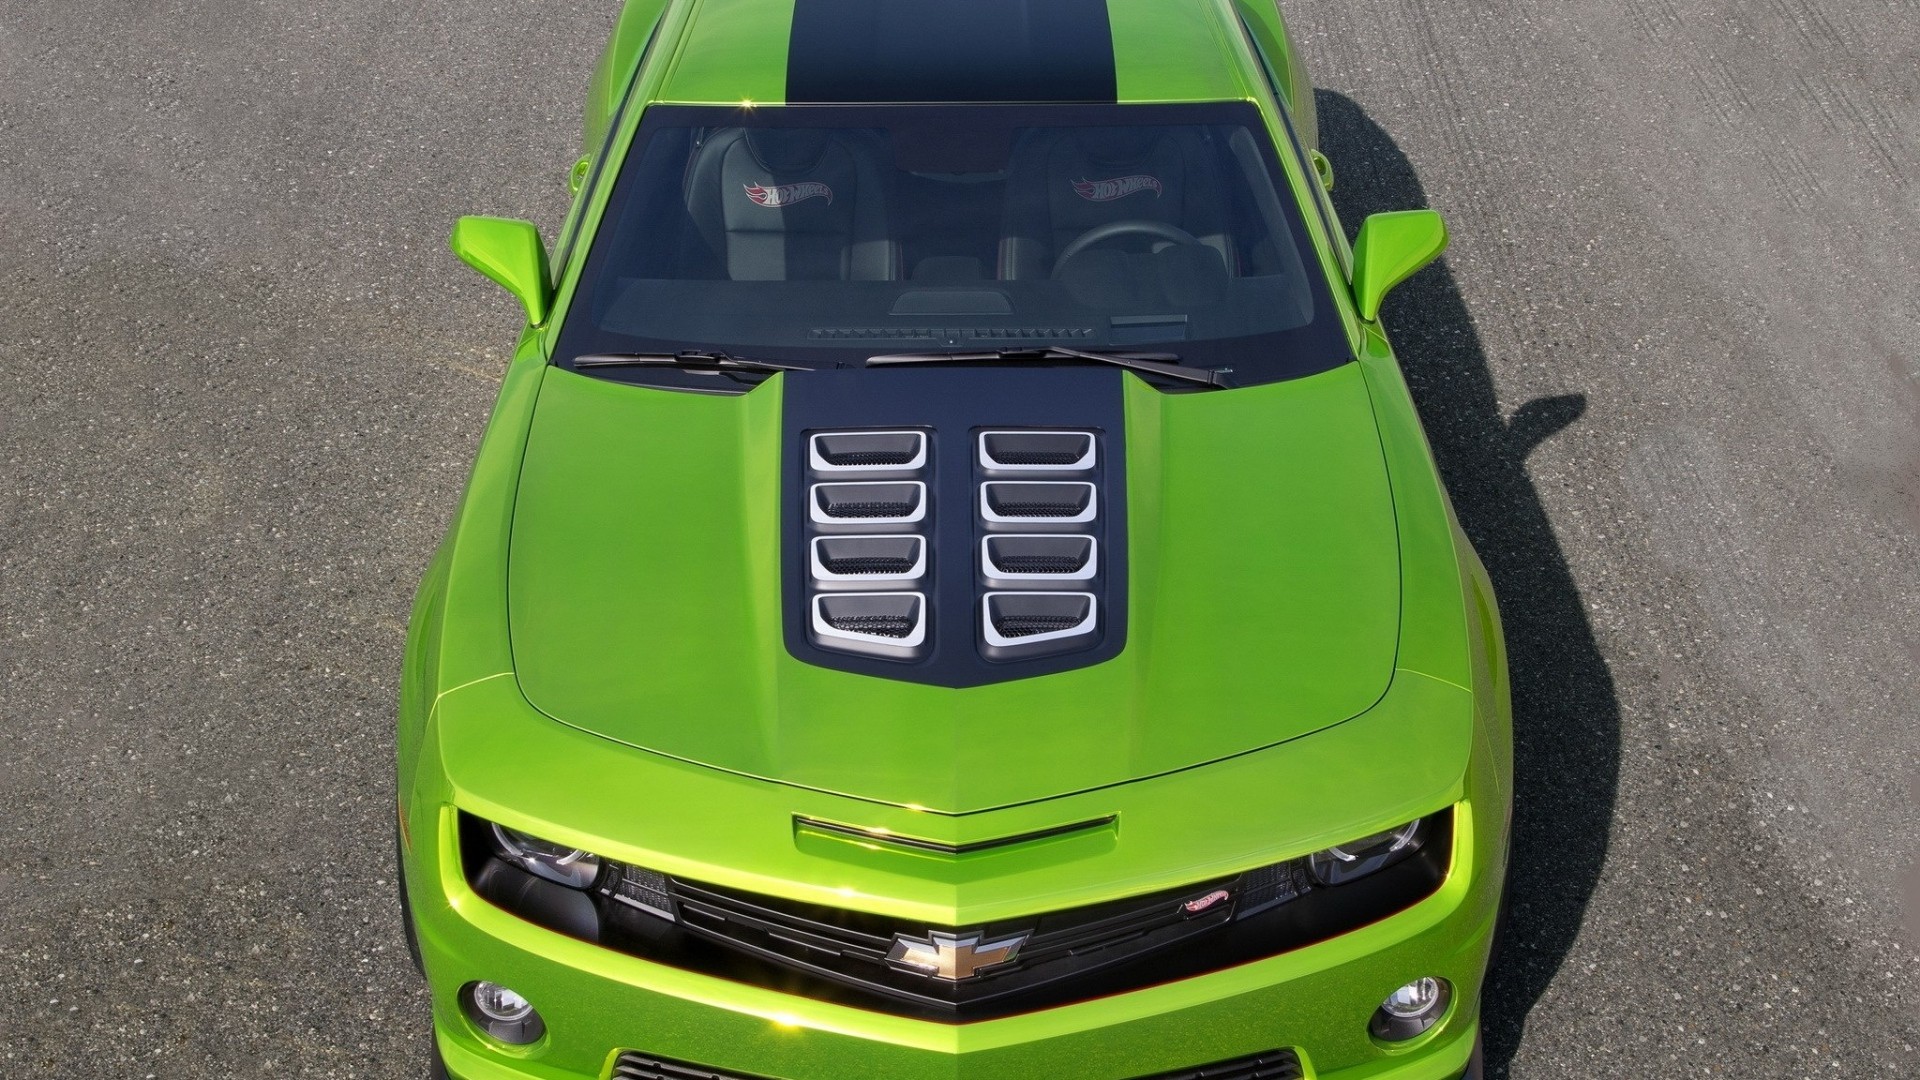 General 1920x1080 green cars vehicle car Chevrolet Chevrolet Camaro muscle cars American cars